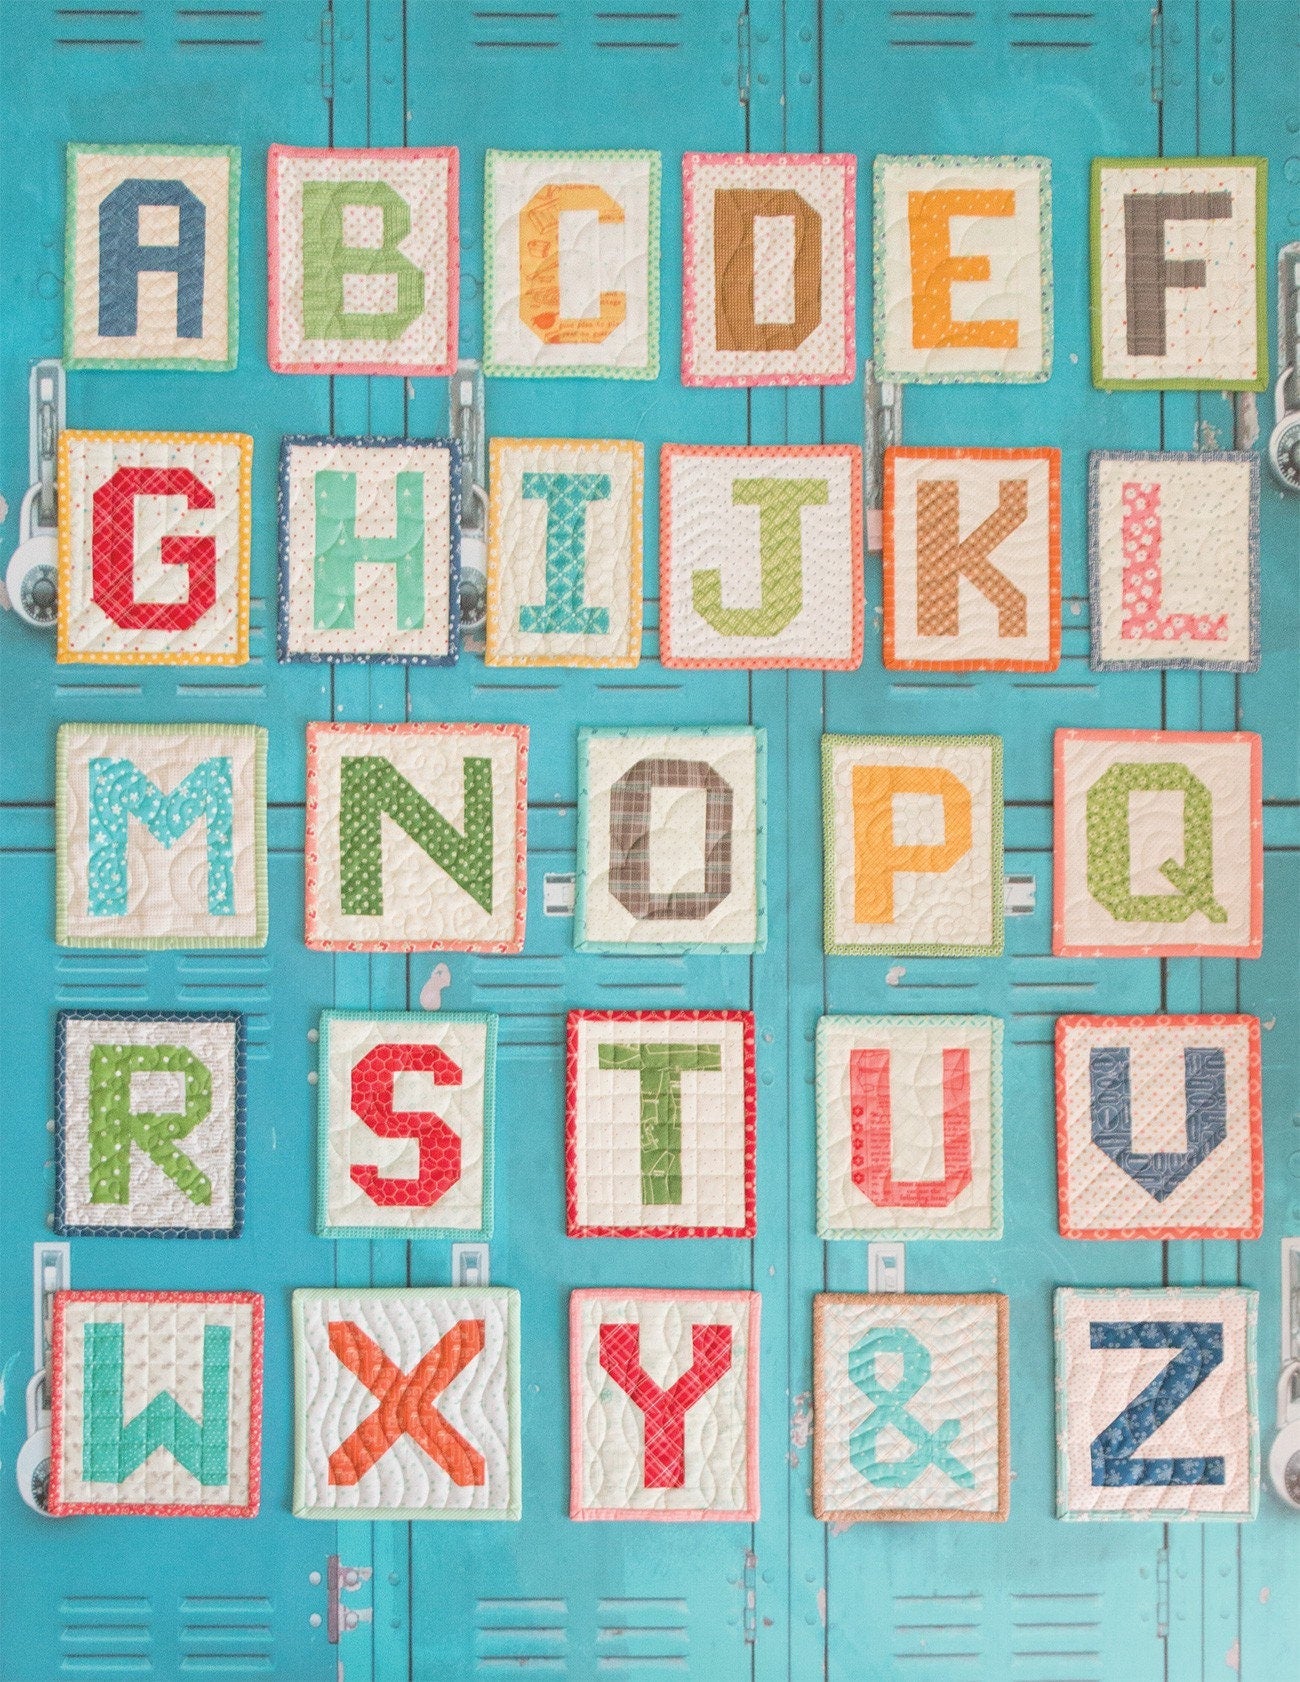 Spelling Bee Quilt Pattern Book by Lori Holt for It's Sew Emma